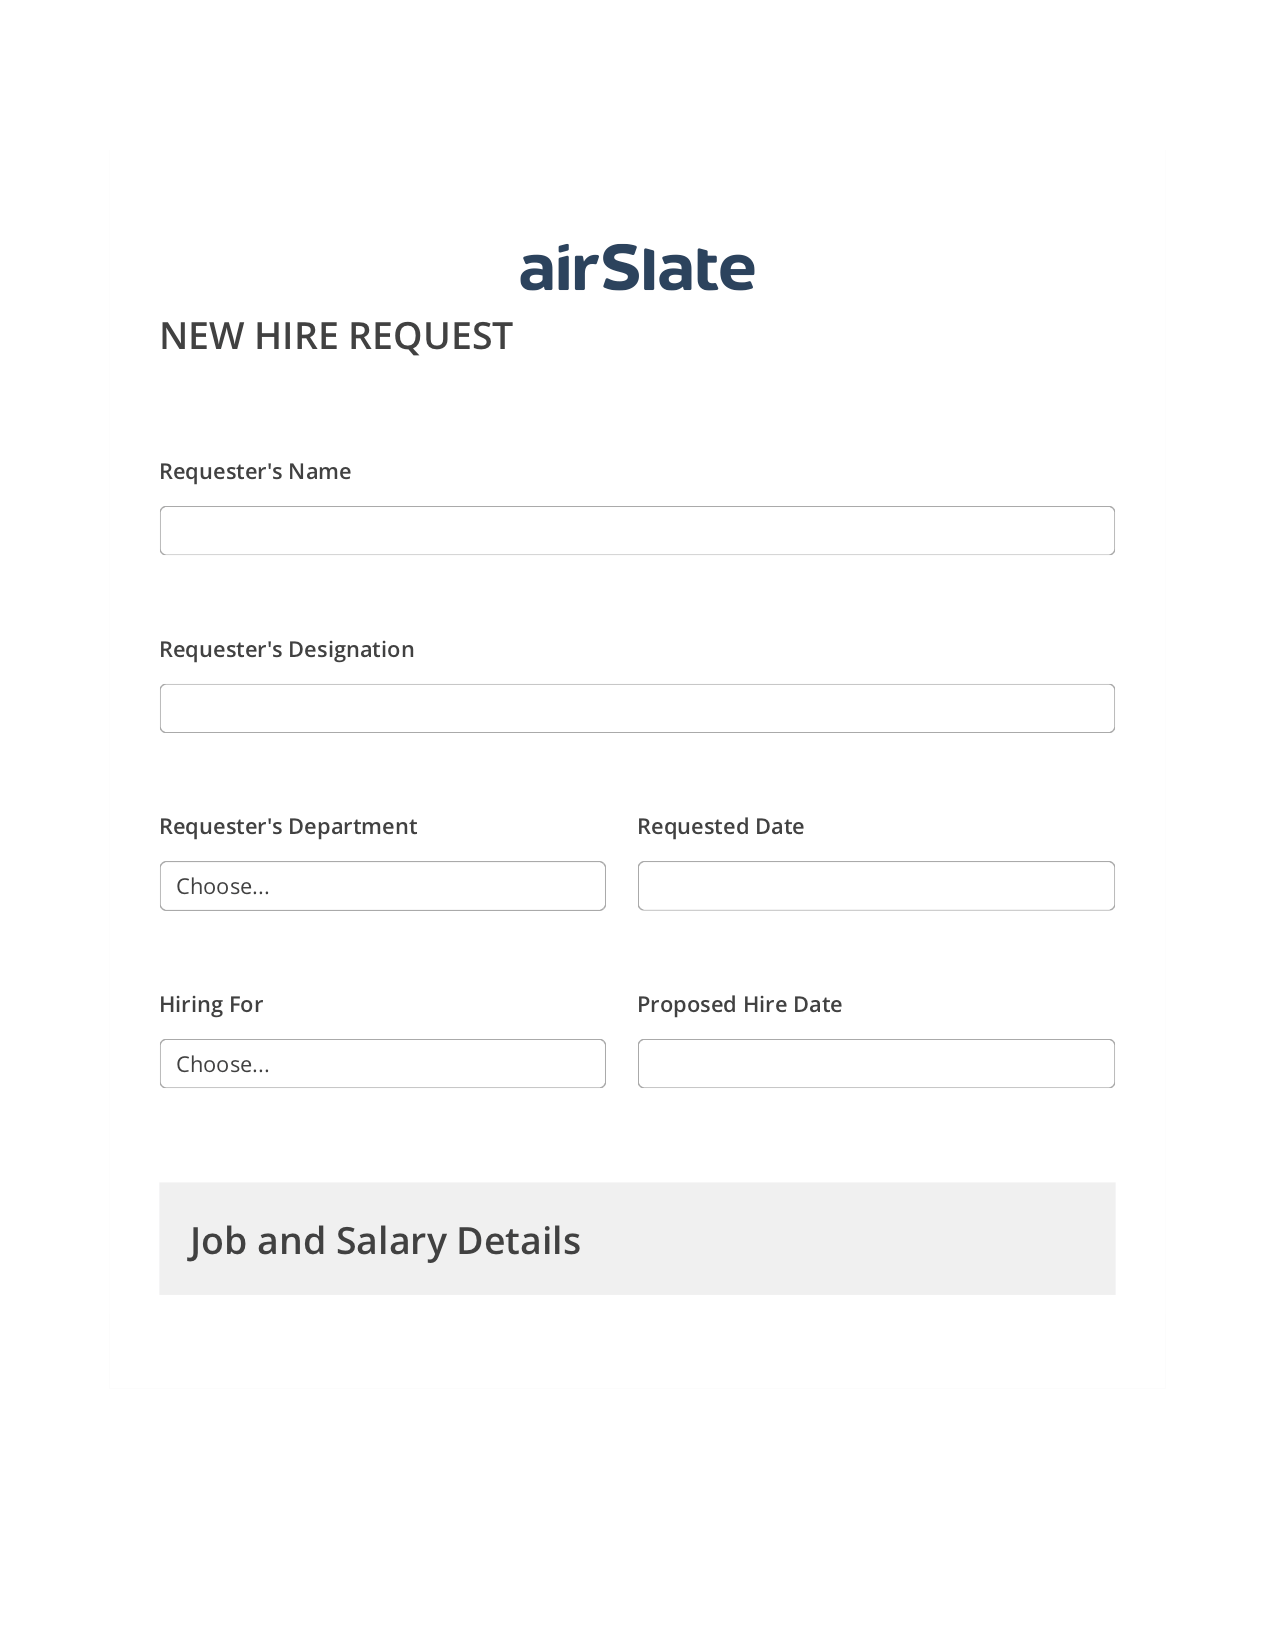 Hiring Request Workflow Pre-fill from Google Sheets Bot, Remove Slate Bot, Archive to SharePoint Folder Bot